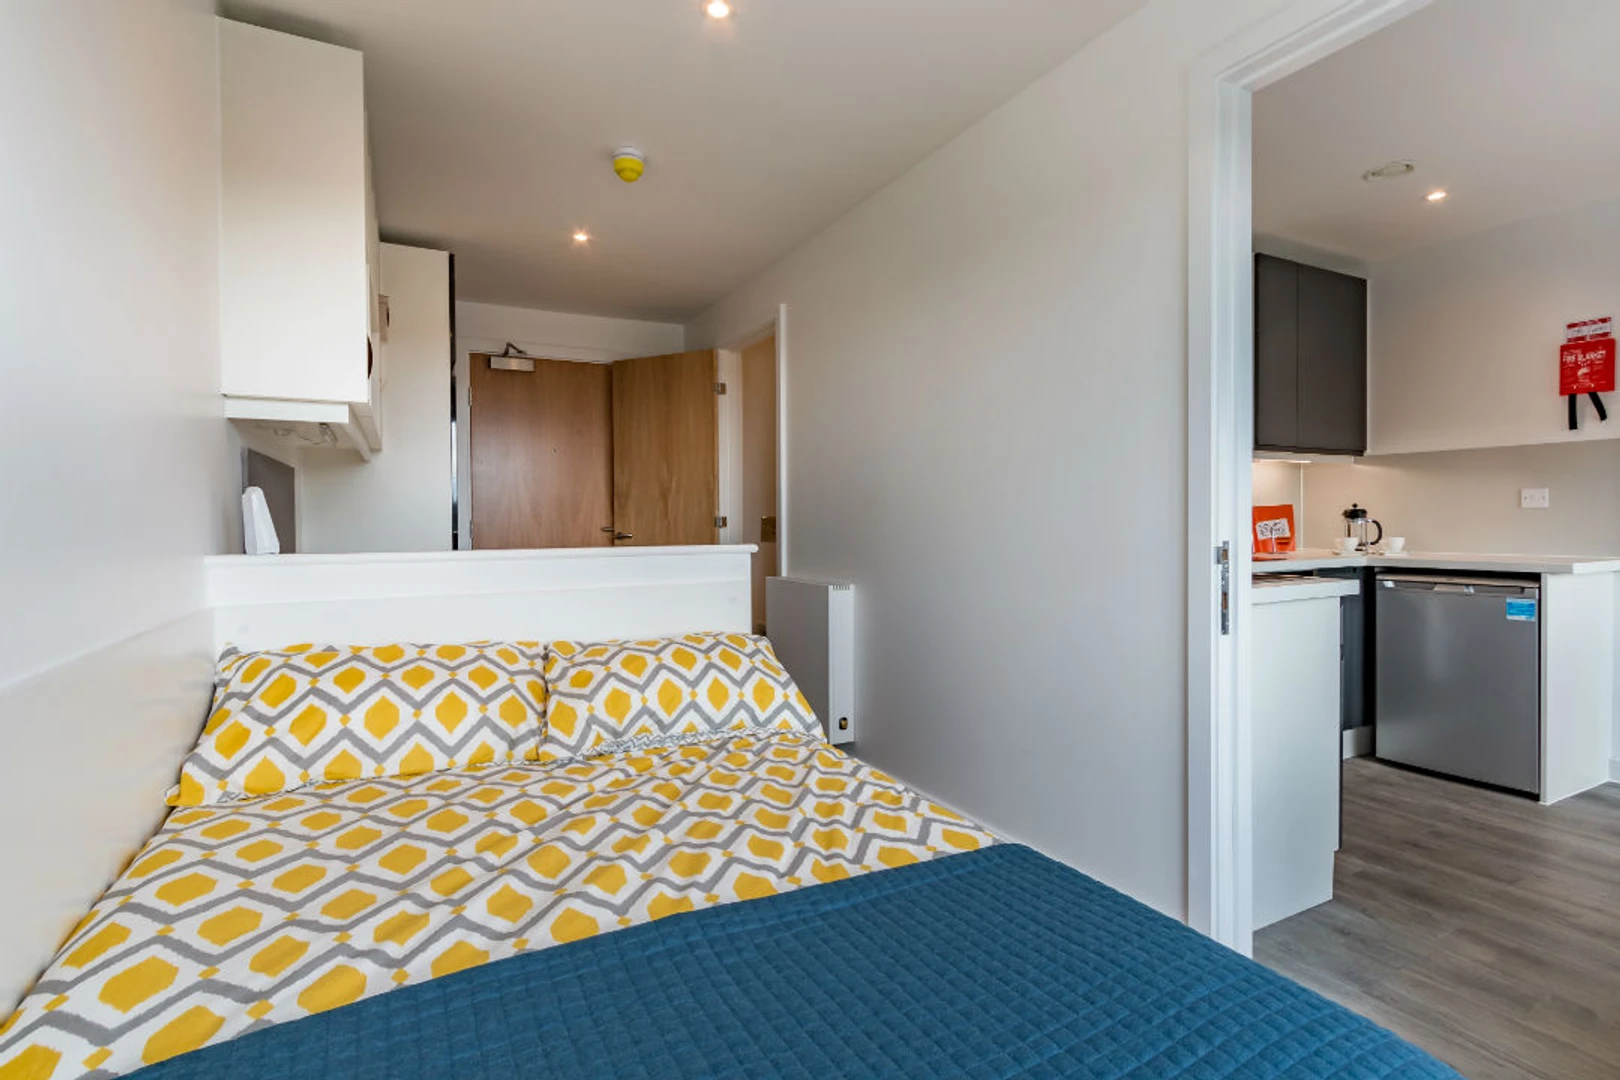 Accommodation in the centre of Canterbury